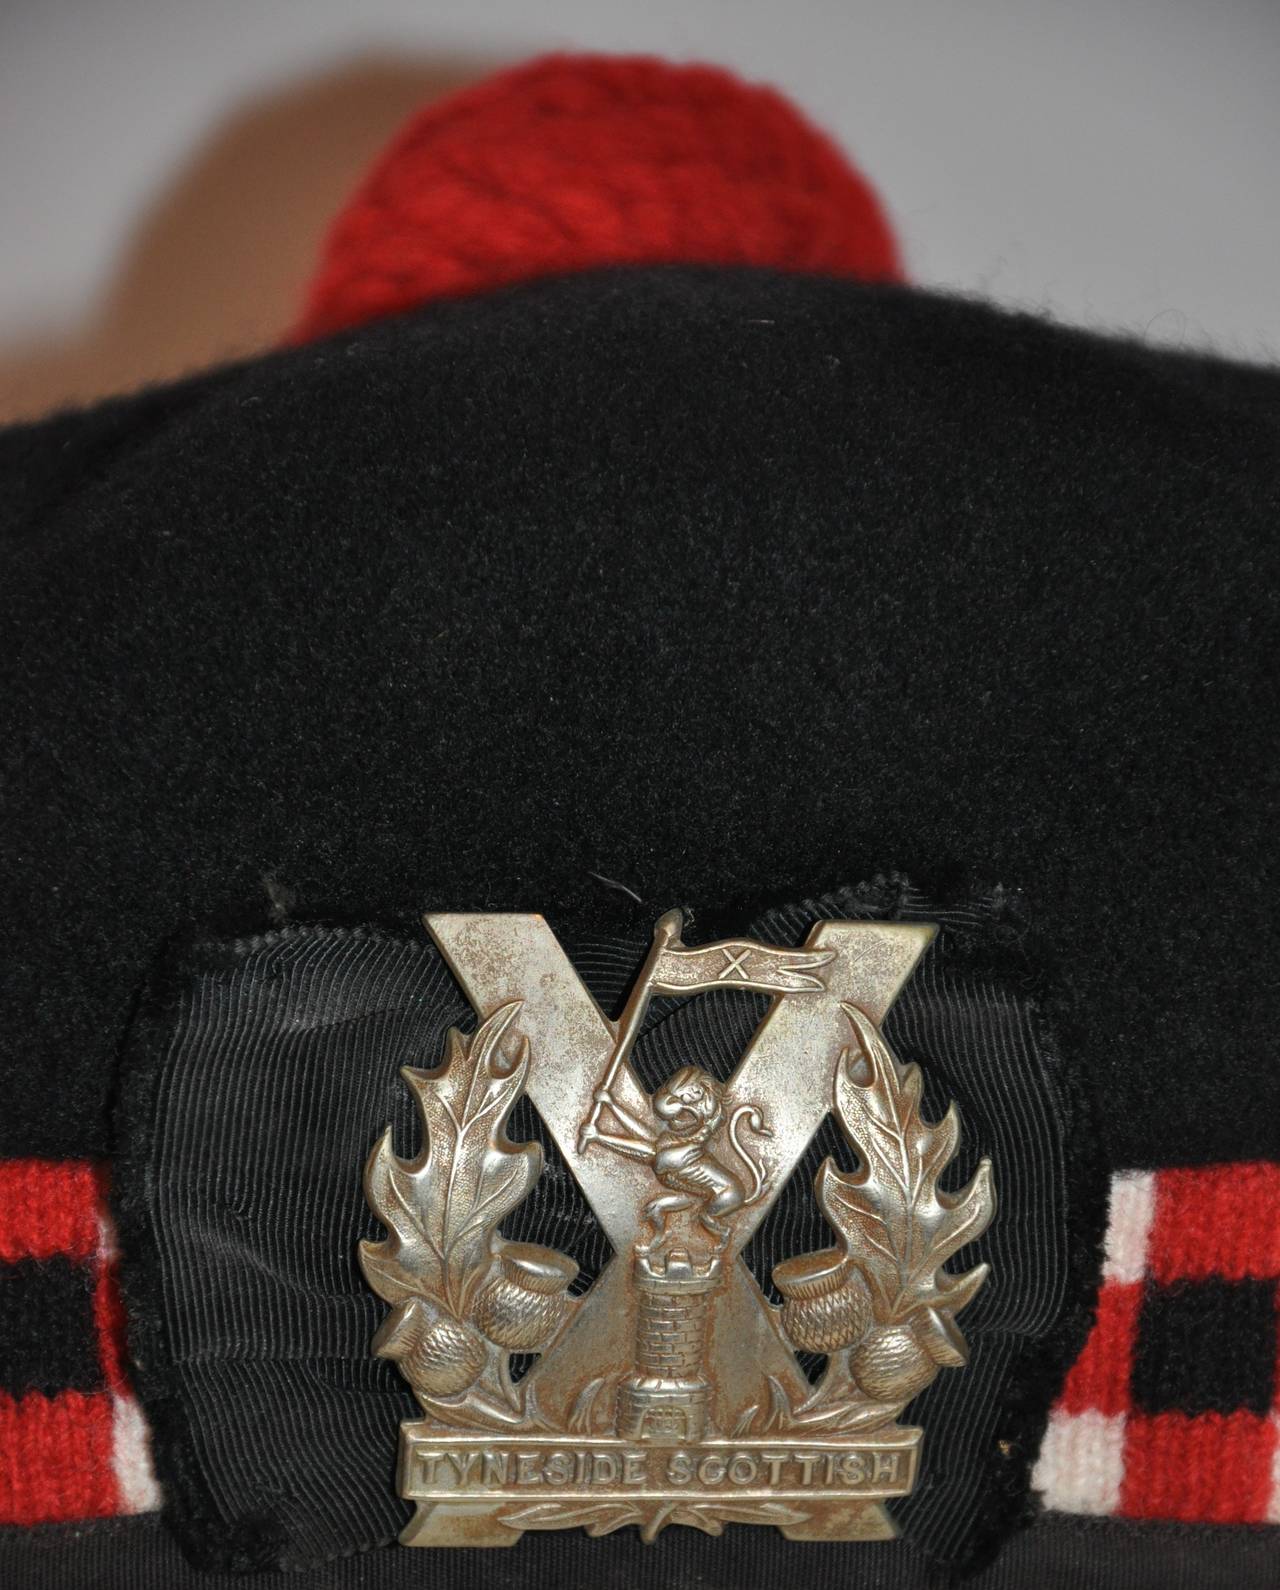        This wonderful detailed wool checkered of colors of black, red and white is accented with a wide silk weave ribbon on back. The center front is highlighted with the crest "Tyneside Scottish" in silver hardware emblem measuring 2